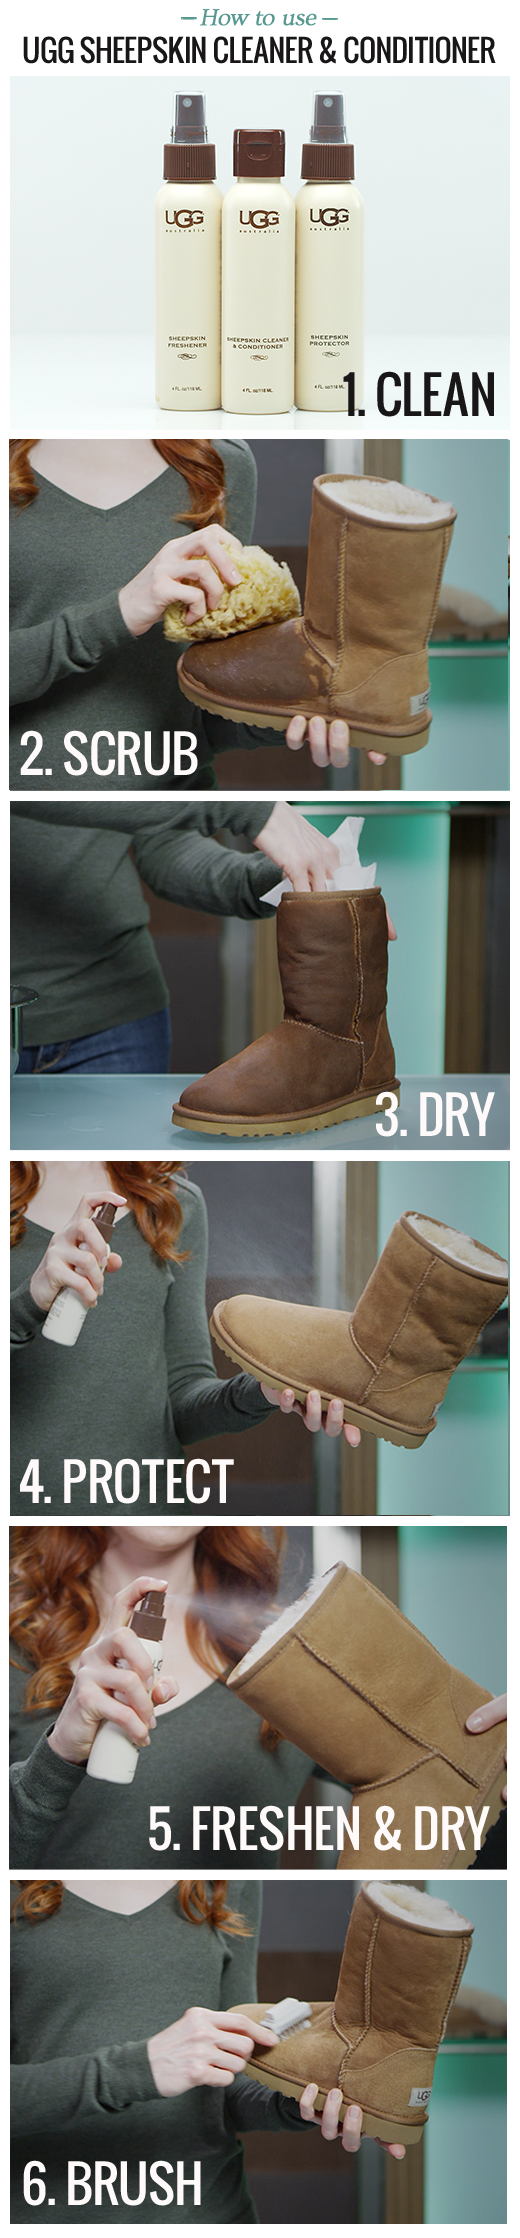 How to clean UGG boots: Keep your favorite UGG boots looking their best with UGG